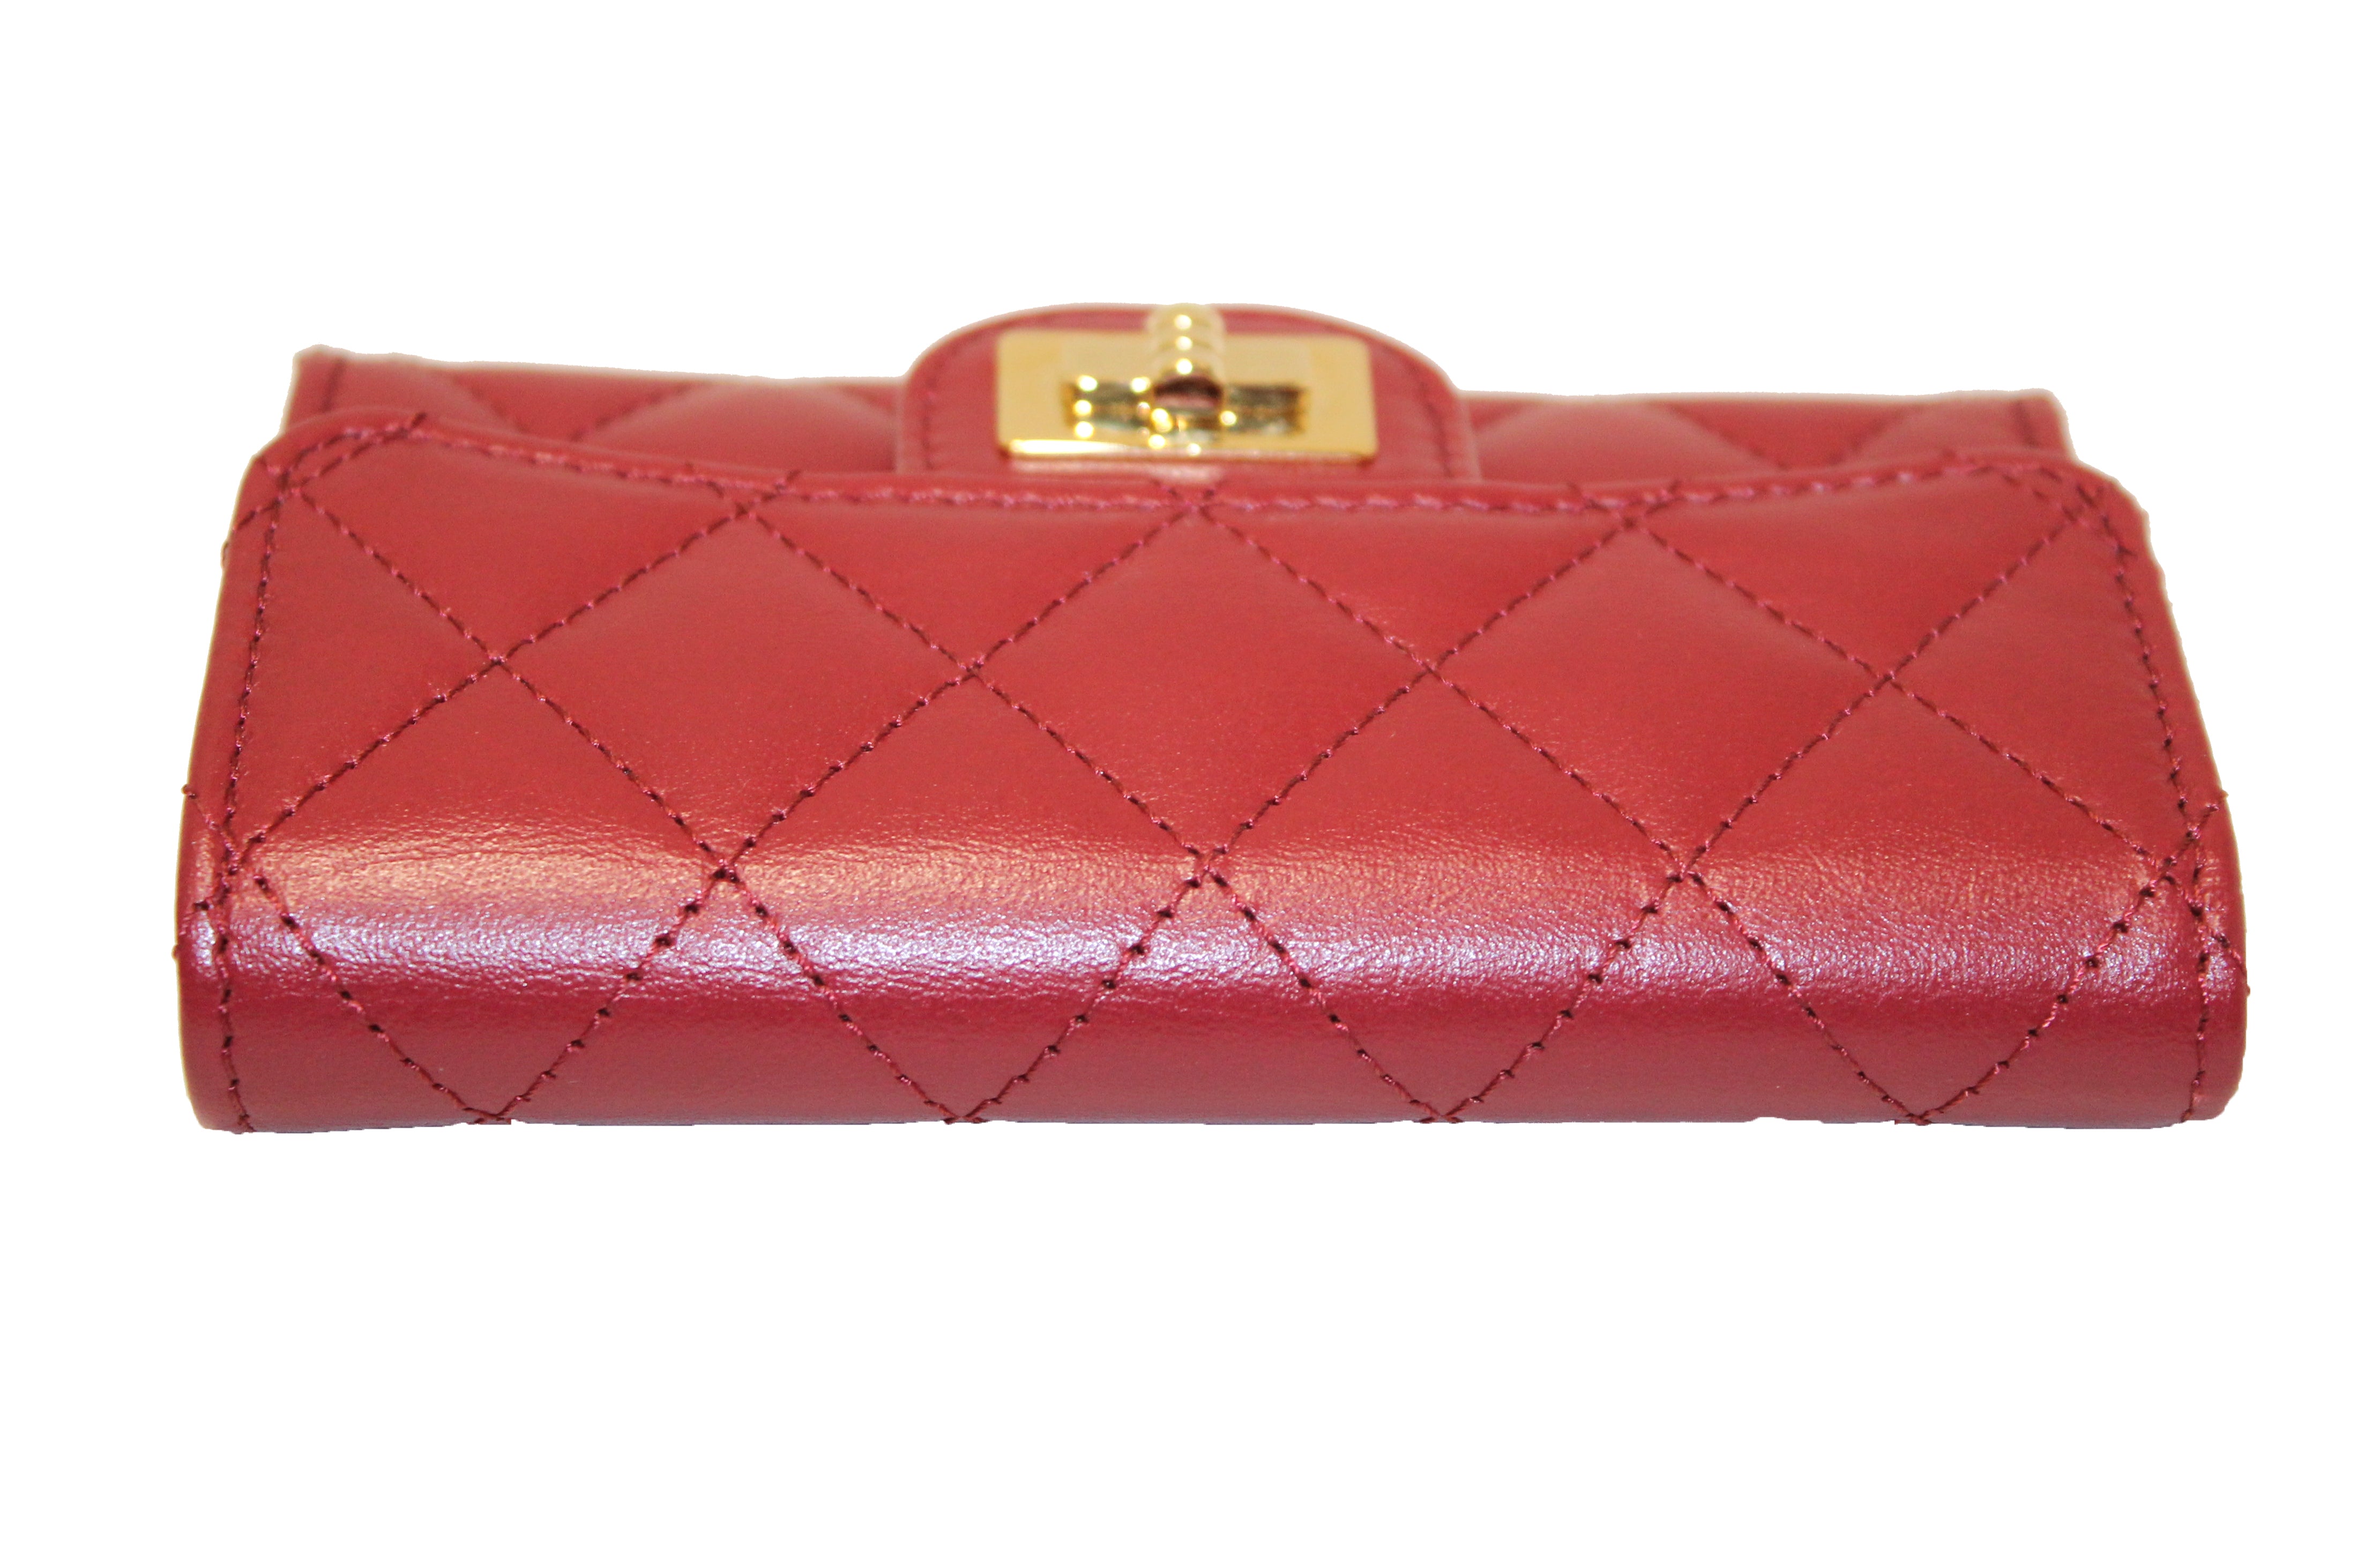 Authentic Chanel Quilted Red Calfskin Leather Reissue Flap Card